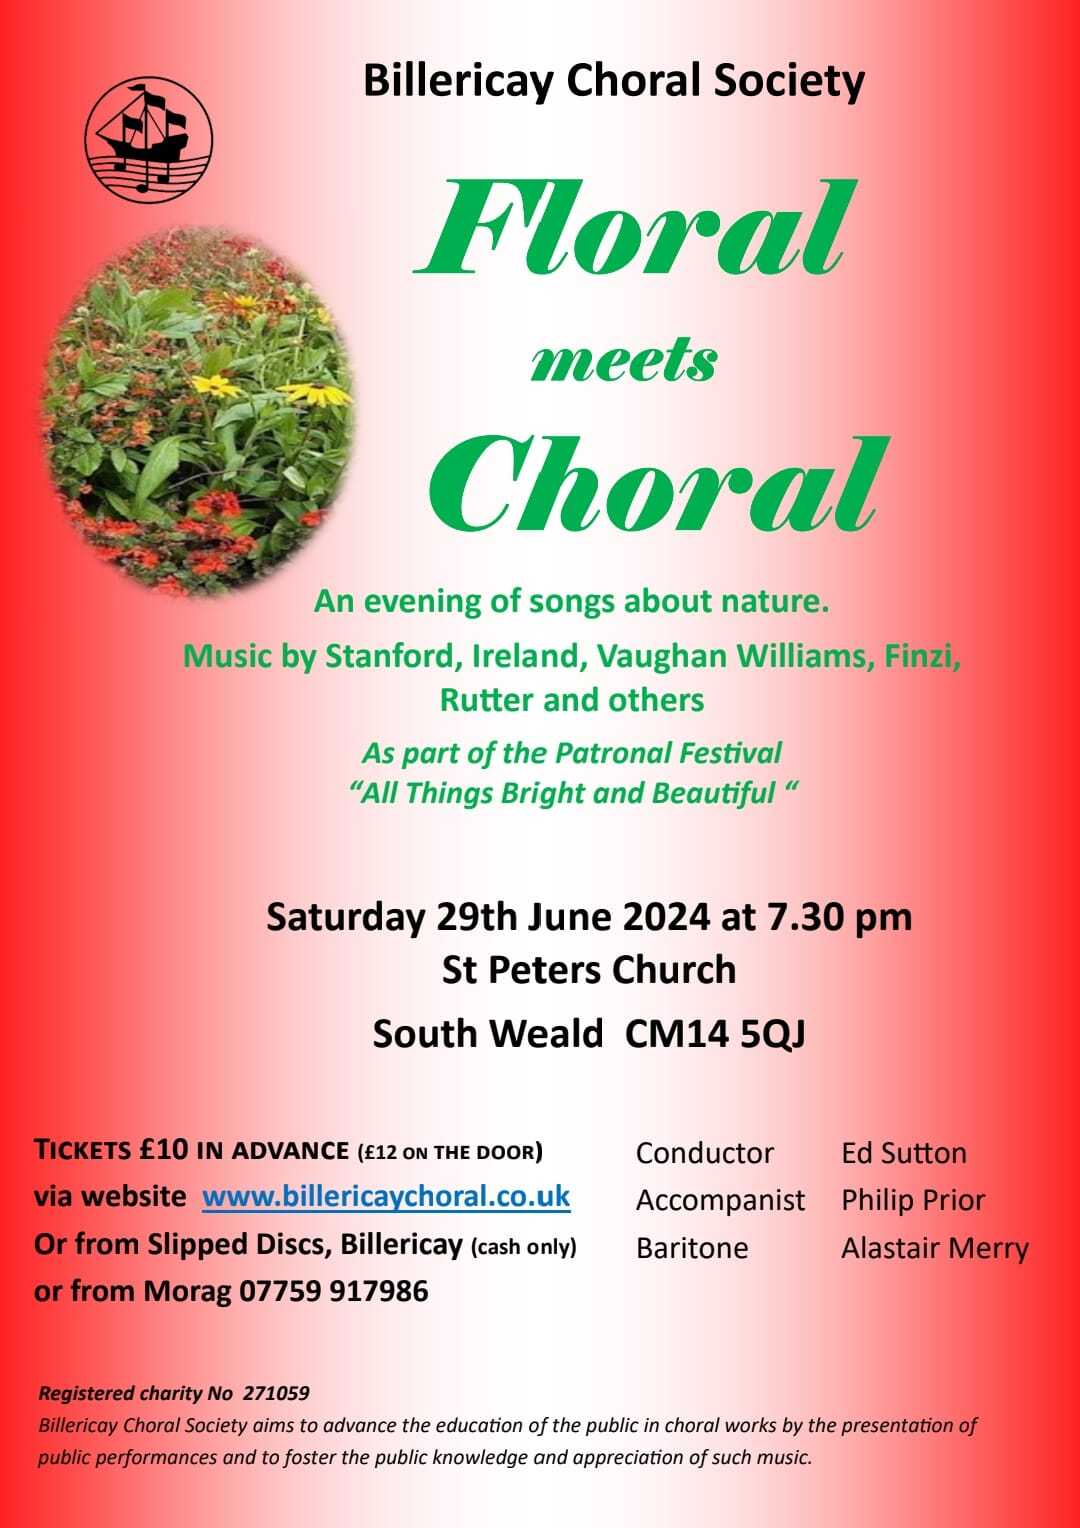 202406 Floral meets Choral